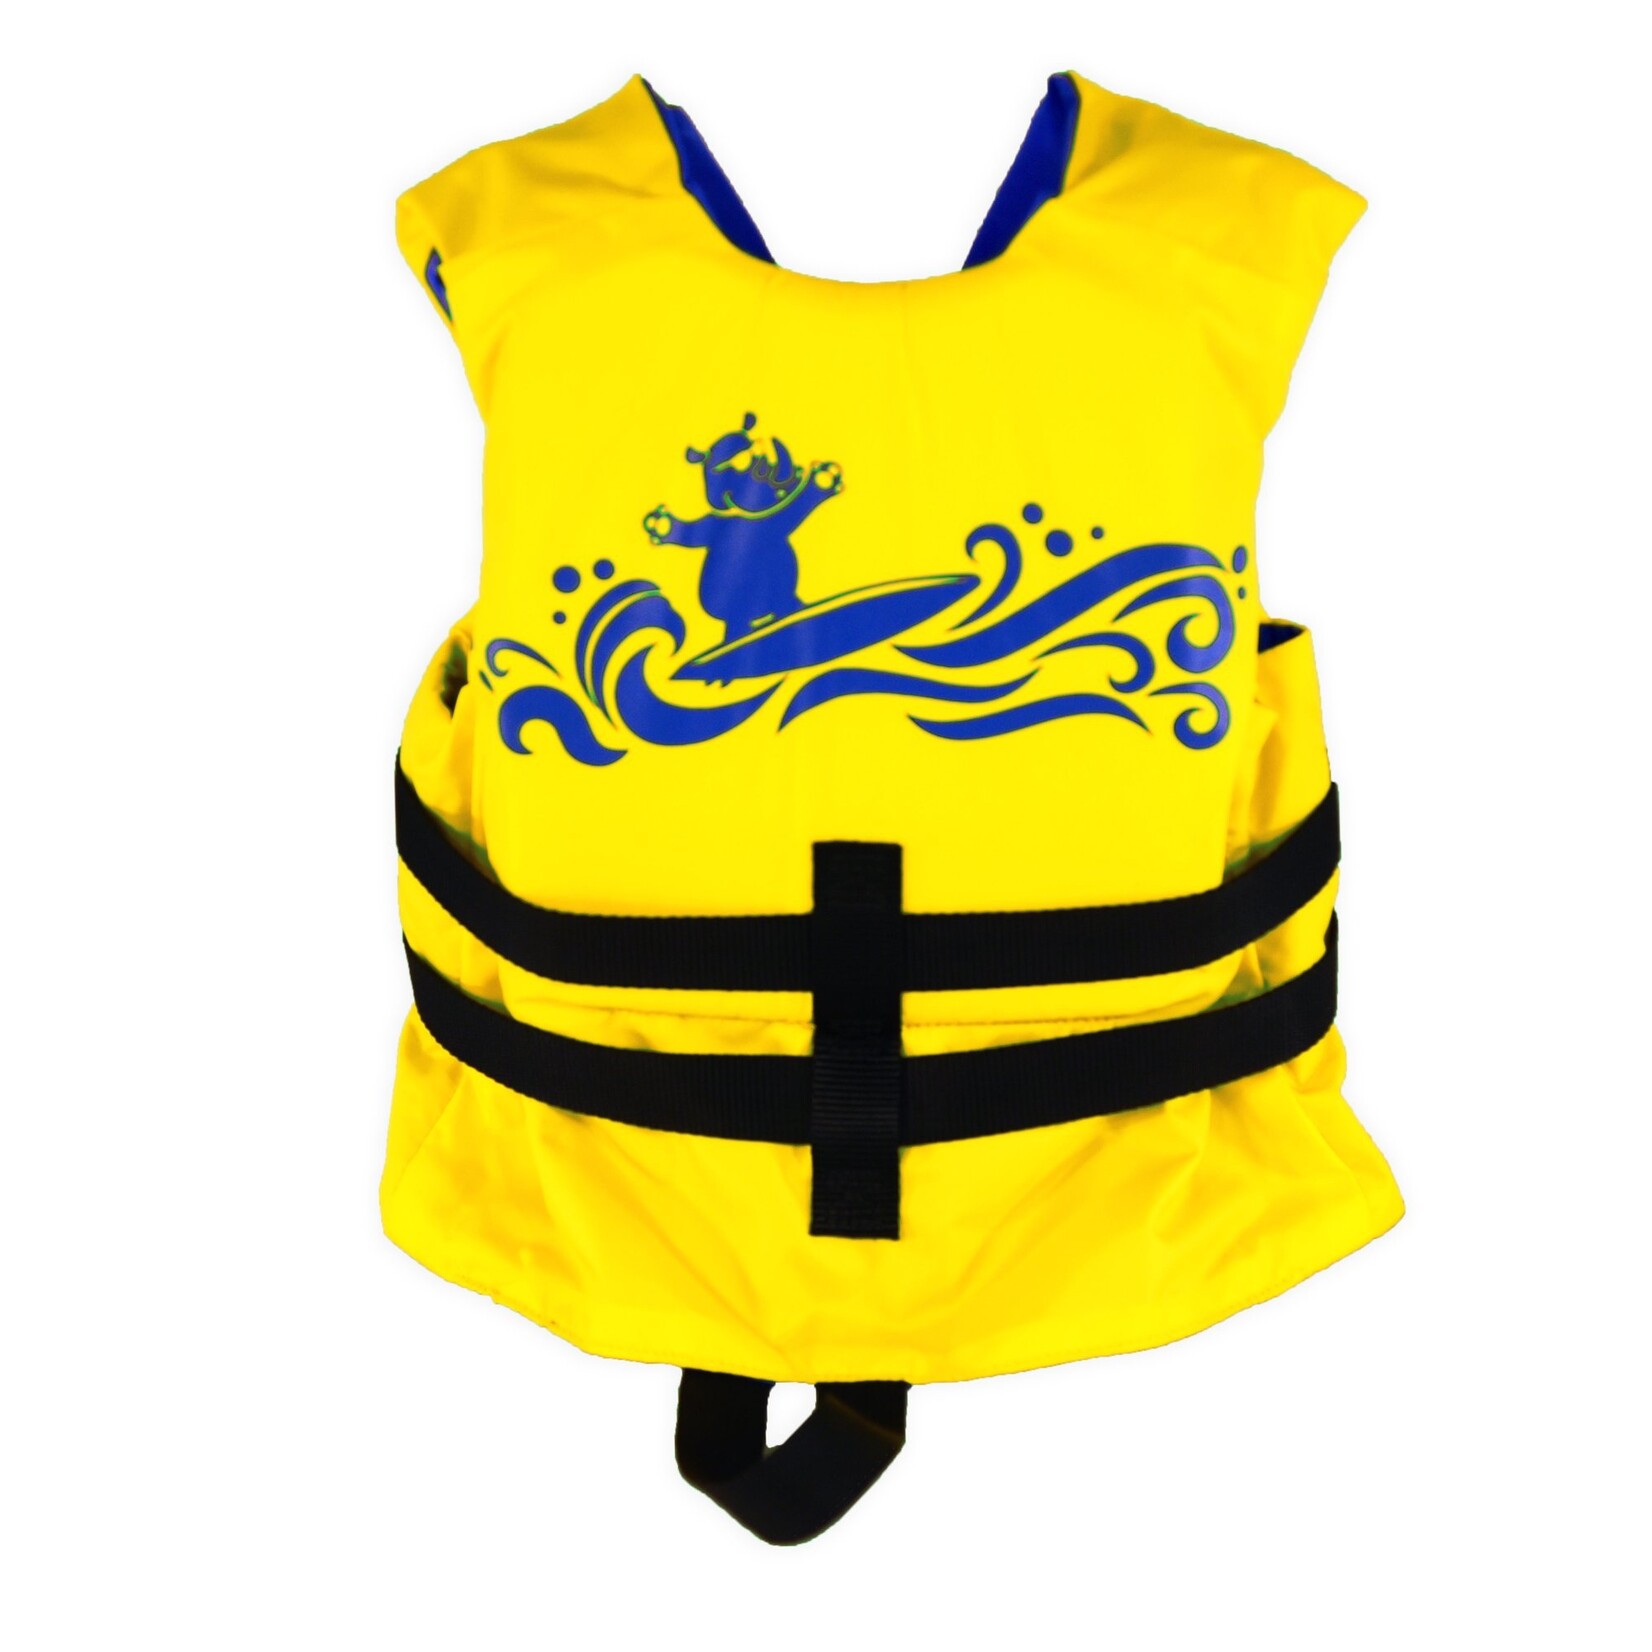 RhinoMaster Youth Life Vest for Watersports - Yellow